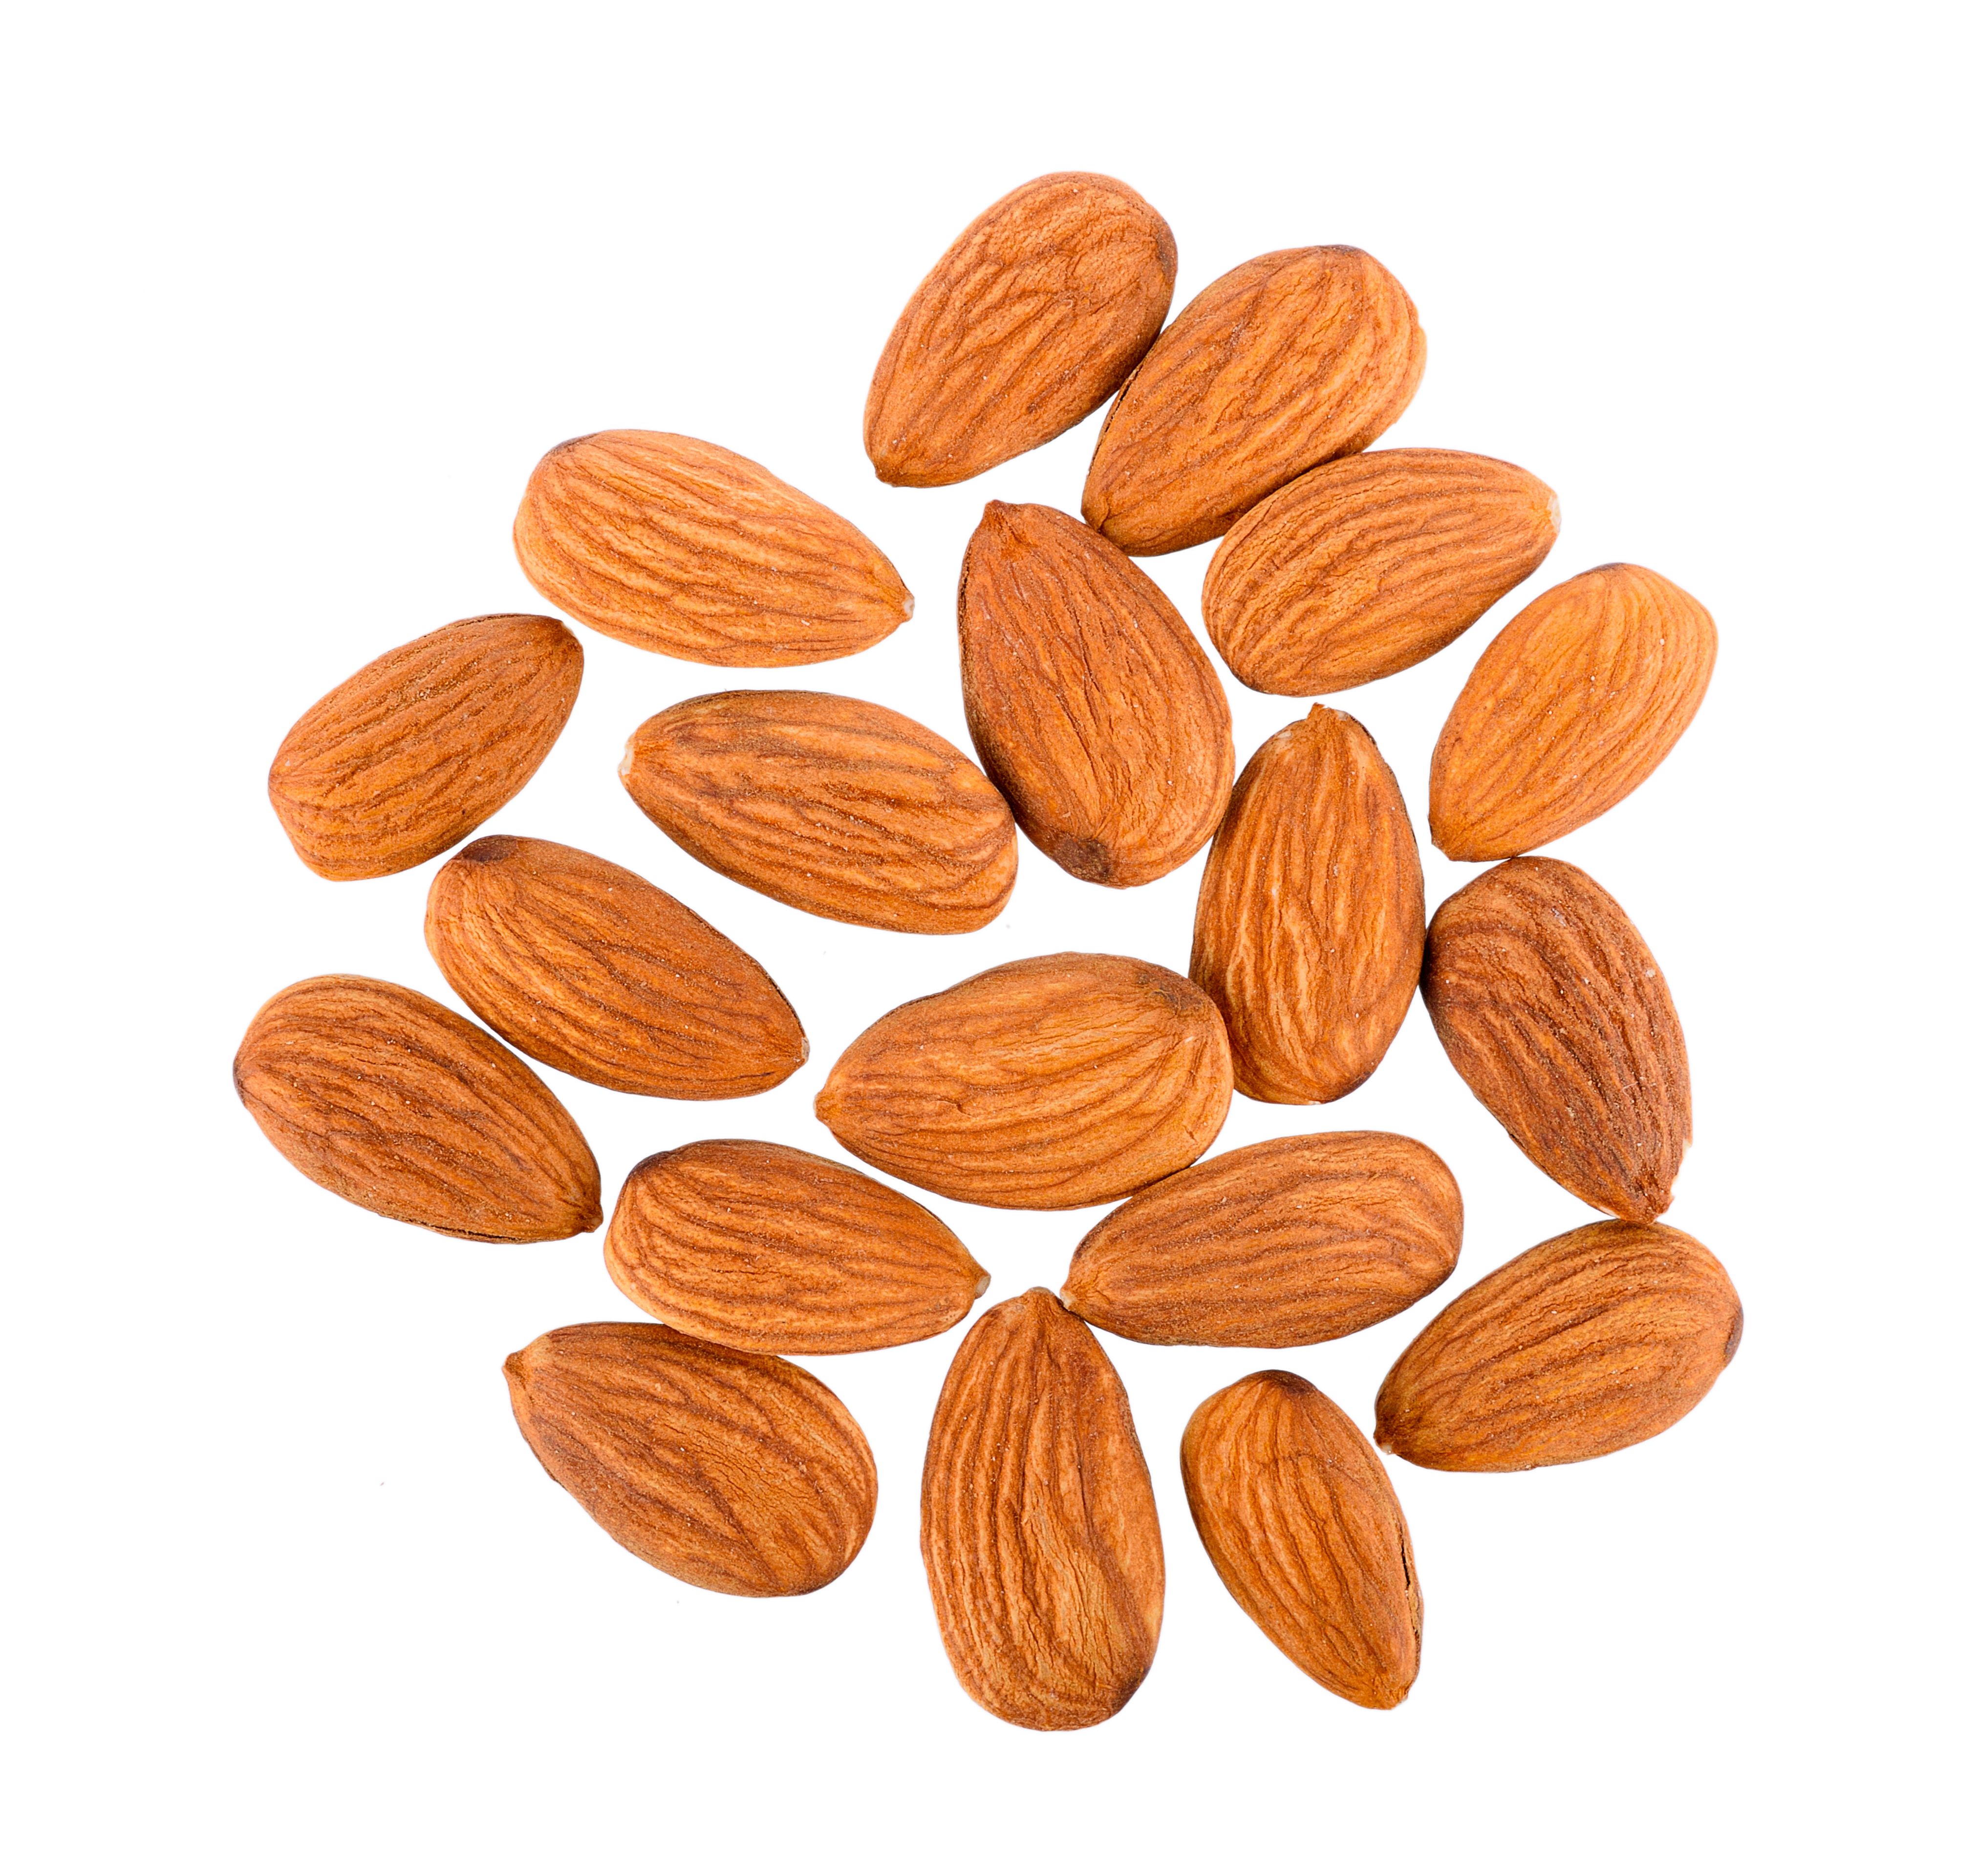 Close-Up Of Almonds Against White Background